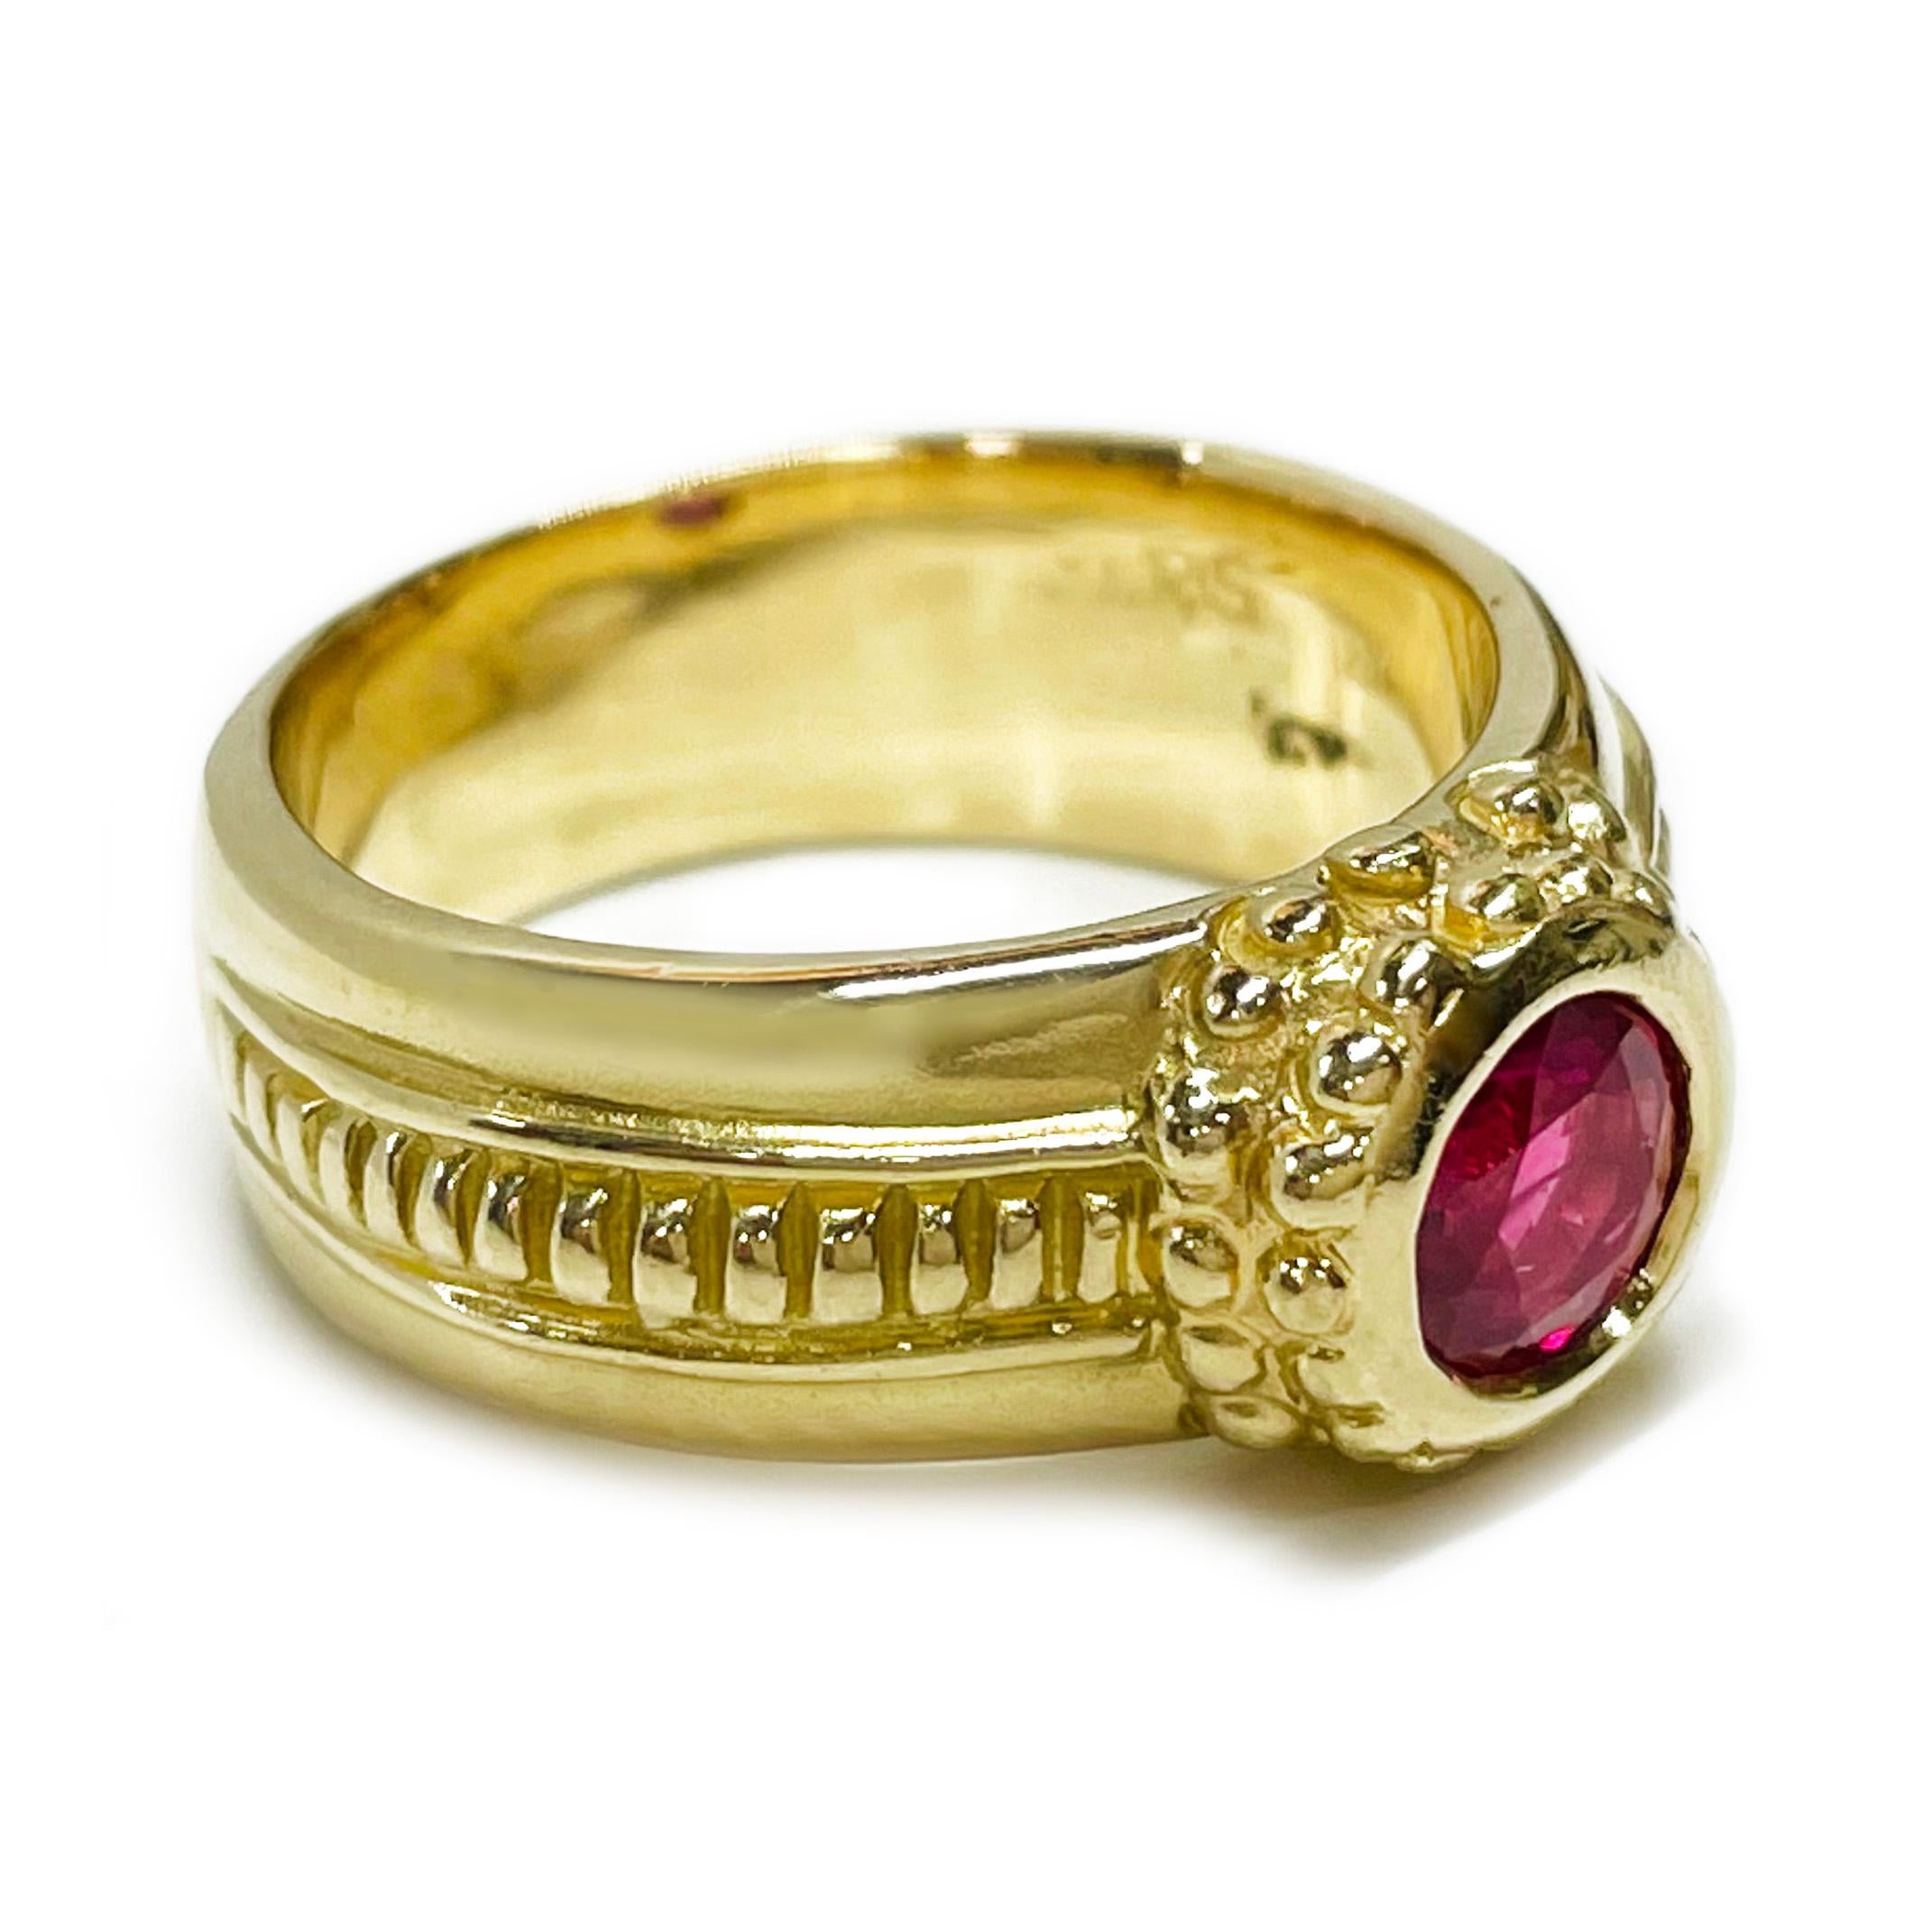 18 Karat Yellow Gold Ruby Ring. The ring features a single round bezel-set Ruby with an approximate carat weight of 0.80ct. The fancy band measures 6.6mm wide with gold beads around the center bezel and gold ridges on the side of the band. Stamped